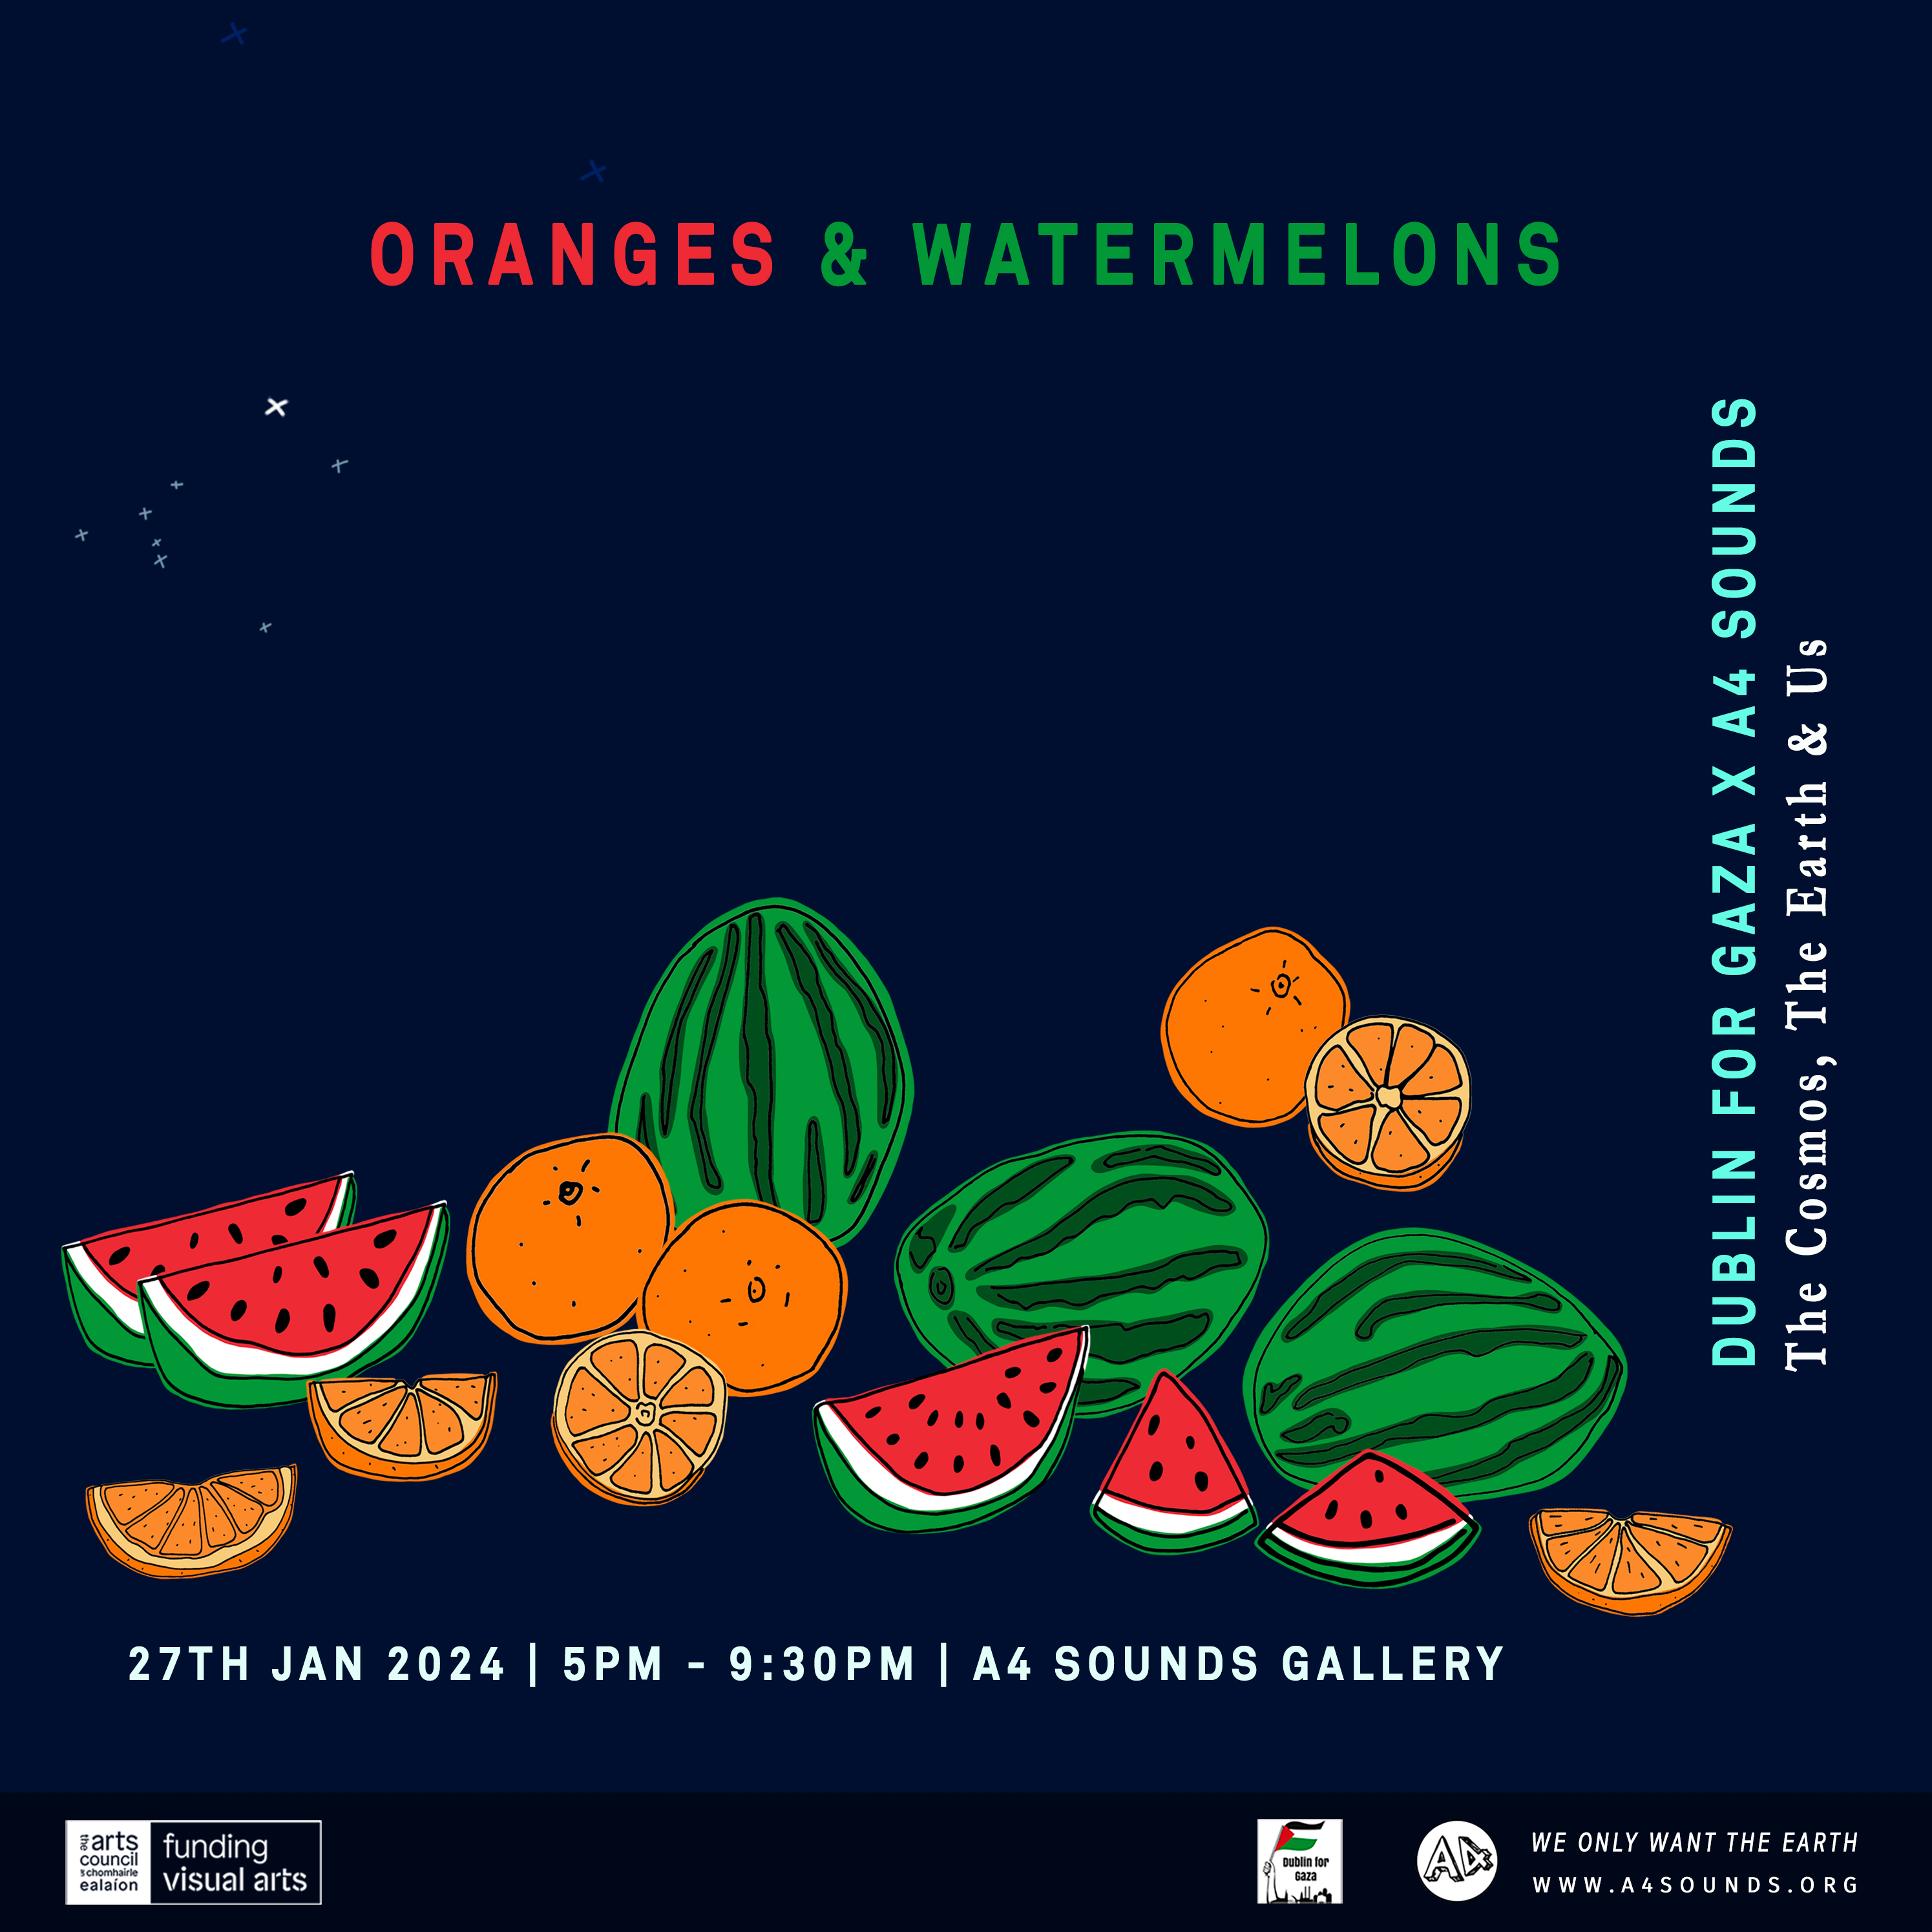 Poster for Oranges and Watermelons event. The image is square with a dark blue background like the night sky. The image is a graphic handdrawn still life of watermelons and oranges. There are some whole oranges, whole watermelons, slices of each, and also some half cut fruit. They are arranged like in a classical still life way. In the top left hand corner there is a drawing of a star constellation that included the star Sirius. The name of the event is in bold text on the top right hand side. Aligned vertically on the right is text that reads: Dublin For Gaza x A4 Sounds. The Cosmos, The Earth & Us. Along the bottom below the image of the fruit is text that reads: Sat 27th Jan. 5pm - 9:30pm. A4 Sounds Gallery.